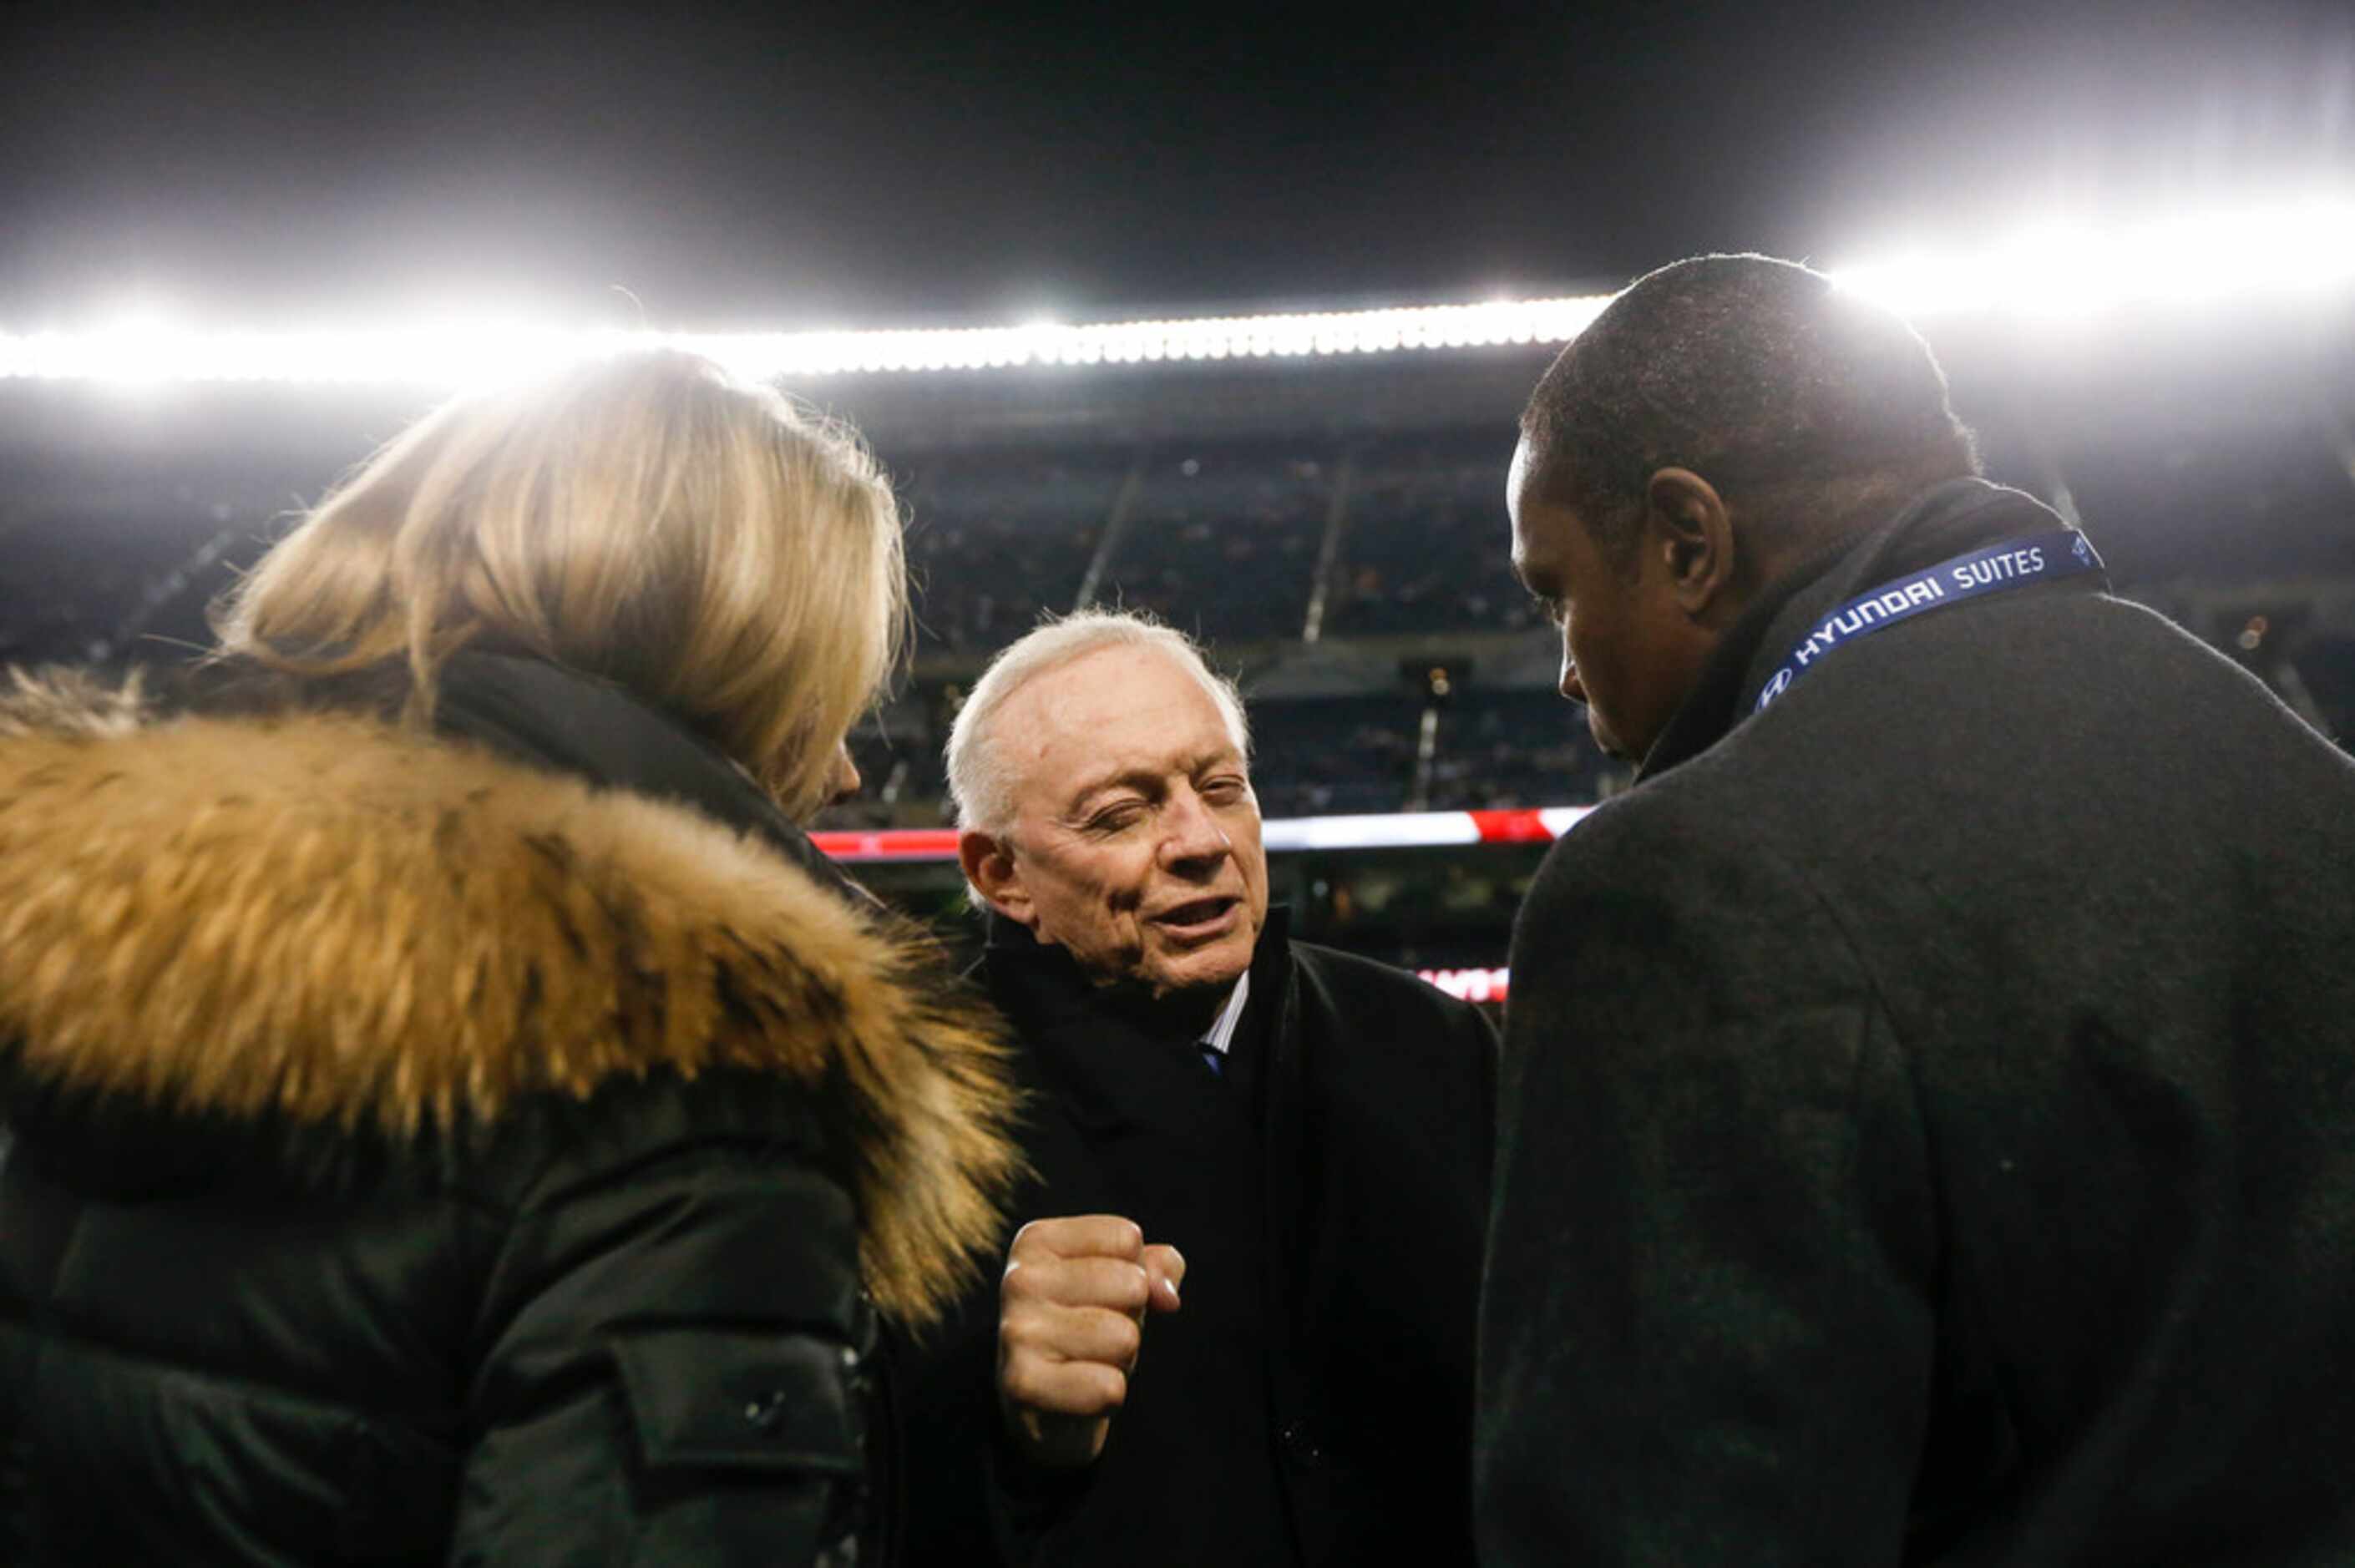 Dallas Cowboys owner Jerry Jones speaks with people on the sidelines prior to a NFL matchup...